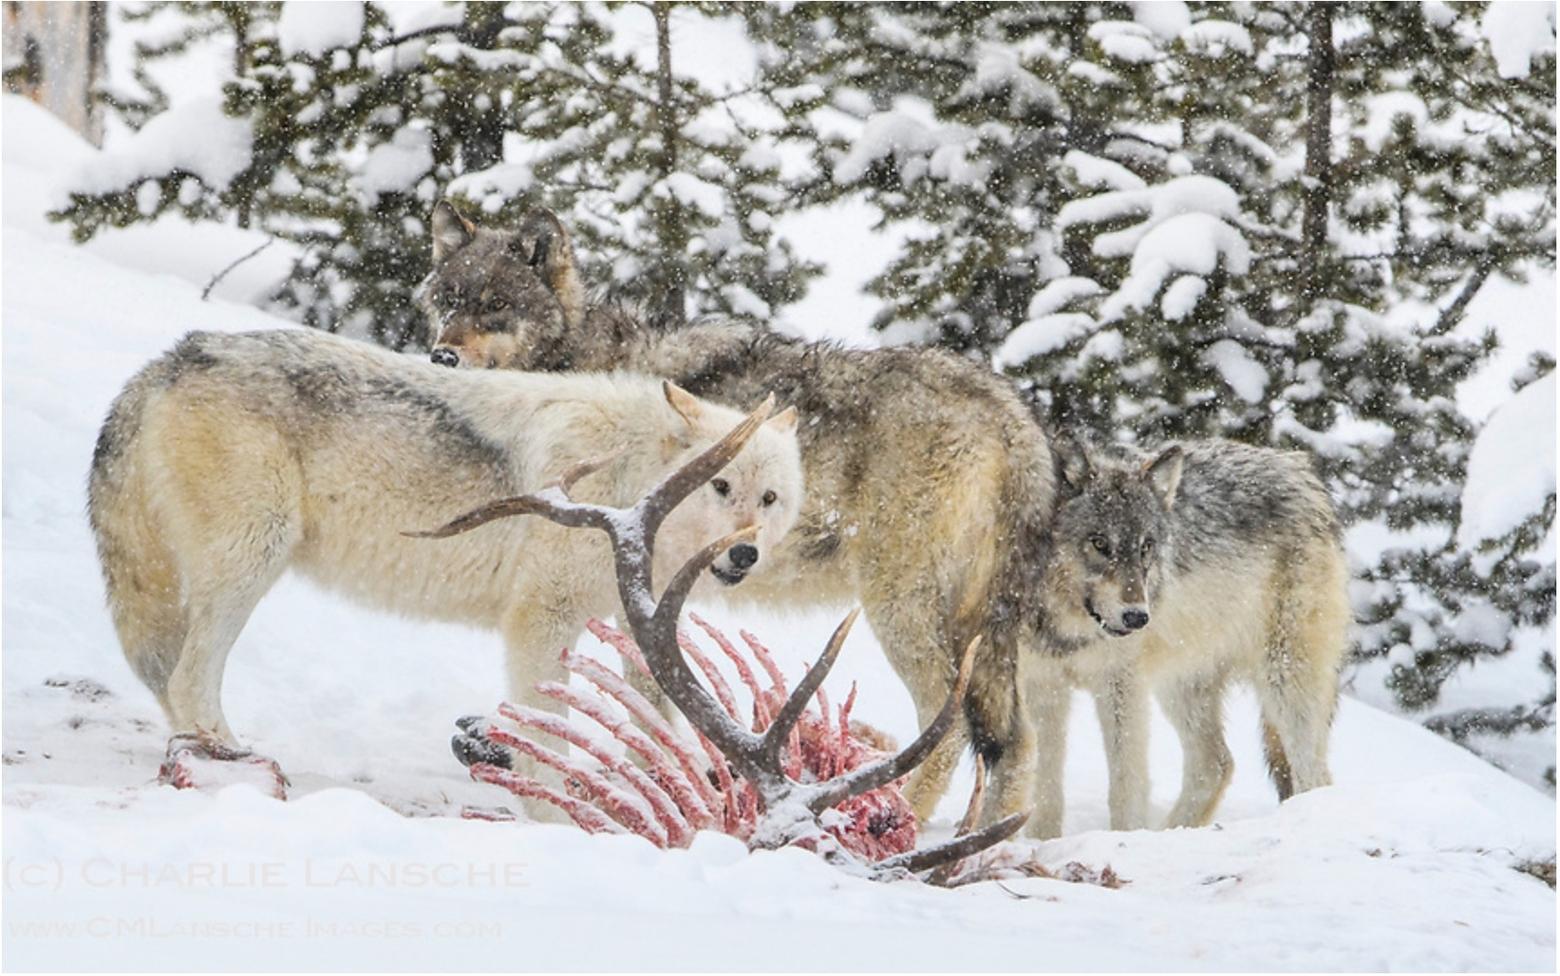 Two wolves in Yellowstone's Wapiti Lake Pack join their white alpha female as she feeds on a freshly killed bull elk on a cold February morning. The alpha female was the only white wolf known in Yellowstone at the time this image was captured. Photo by Charlie M. Lansche